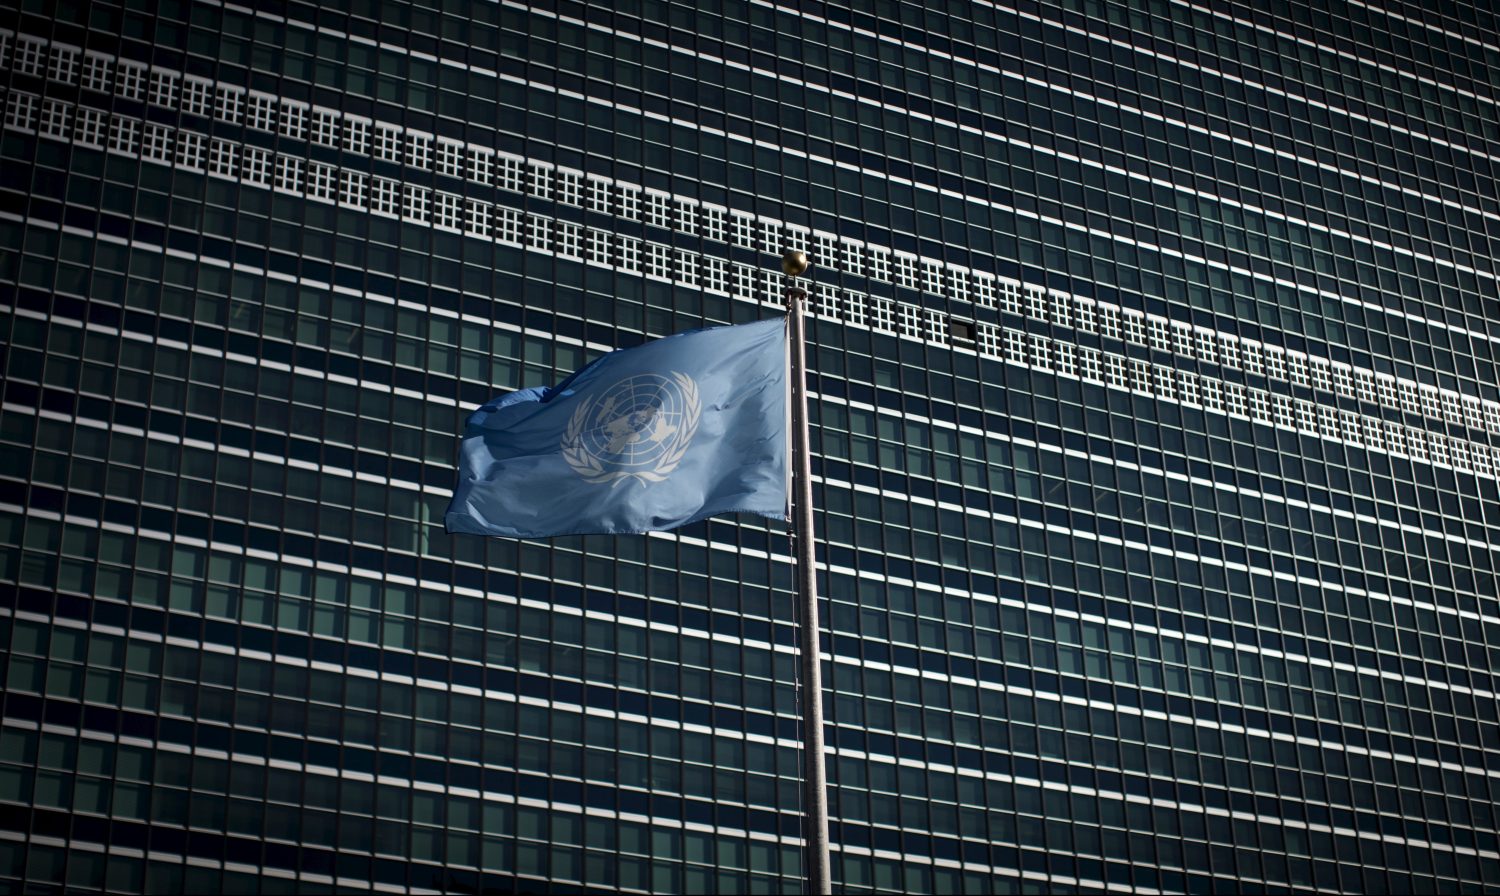 The United Nations flag flies in front of the Secretariat Building at the United Nations headquarters in New York City September 18, 2015. As leaders from almost 200 nations gather for the annual general assembly at the United Nations, the world body created 70 years ago, Reuters photographer Mike Segar documented quieter moments at the famed 18-acre headquarters on Manhattan's East Side. The U.N., established as the successor to the failed League of Nations after World War Two to prevent a similar conflict from occurring again, attracts more than a million visitors every year to its iconic New York site. The marathon of speeches and meetings this year will address issues from the migrant crisis in Europe to climate change and the fight against terrorism. REUTERS/Mike SegarPICTURE 3 OF 30 FOR WIDER IMAGE STORY "INSIDE THE UNITED NATIONS HEADQUARTERS"SEARCH "INSIDE UN" FOR ALL IMAGES  - GF10000219185